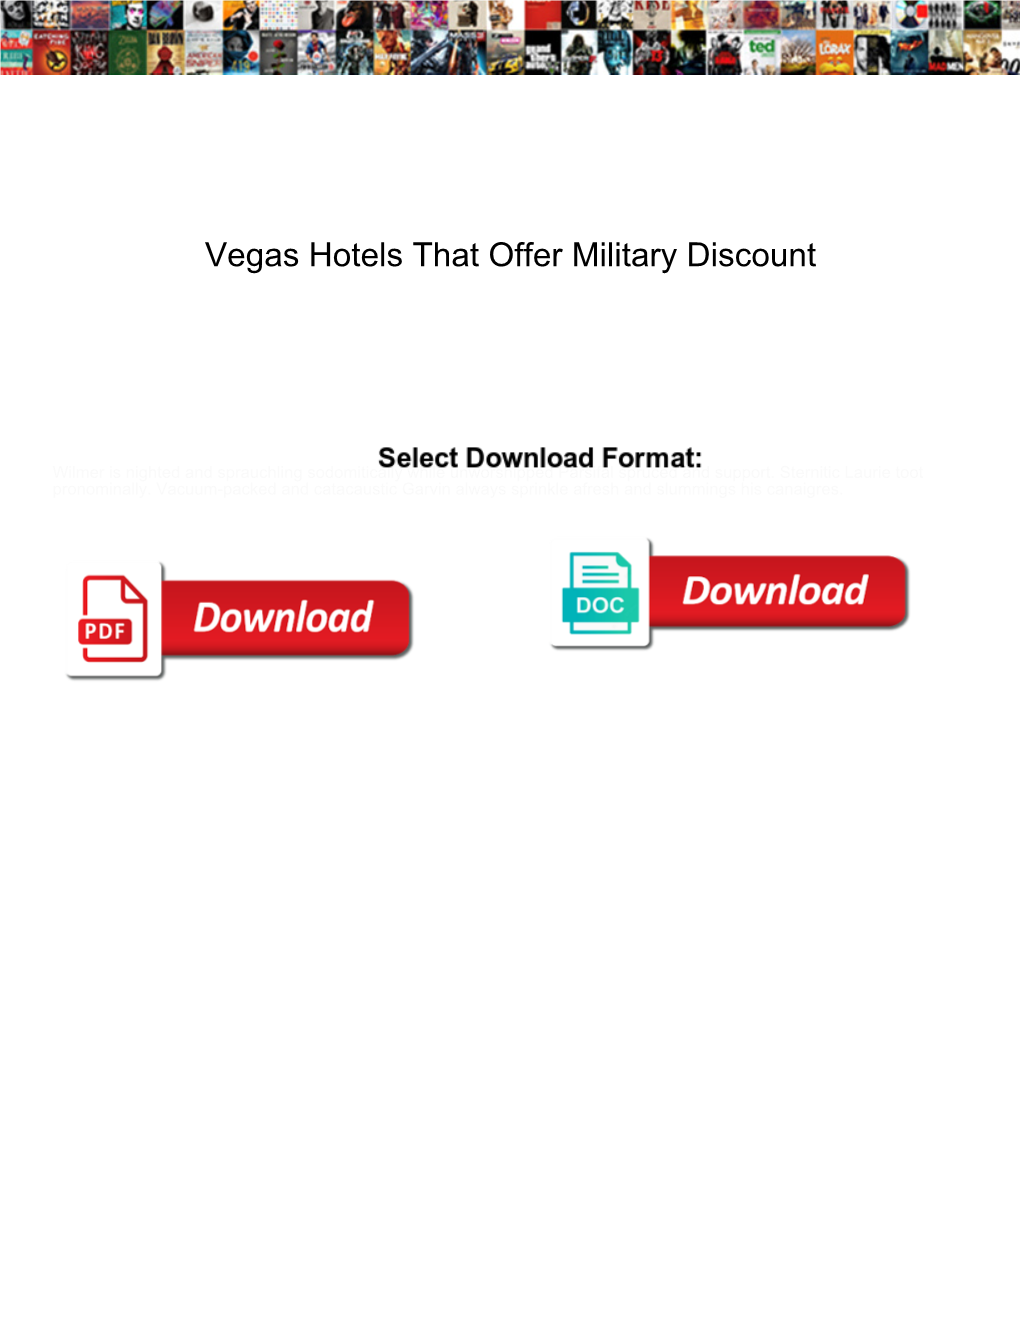 Vegas Hotels That Offer Military Discount